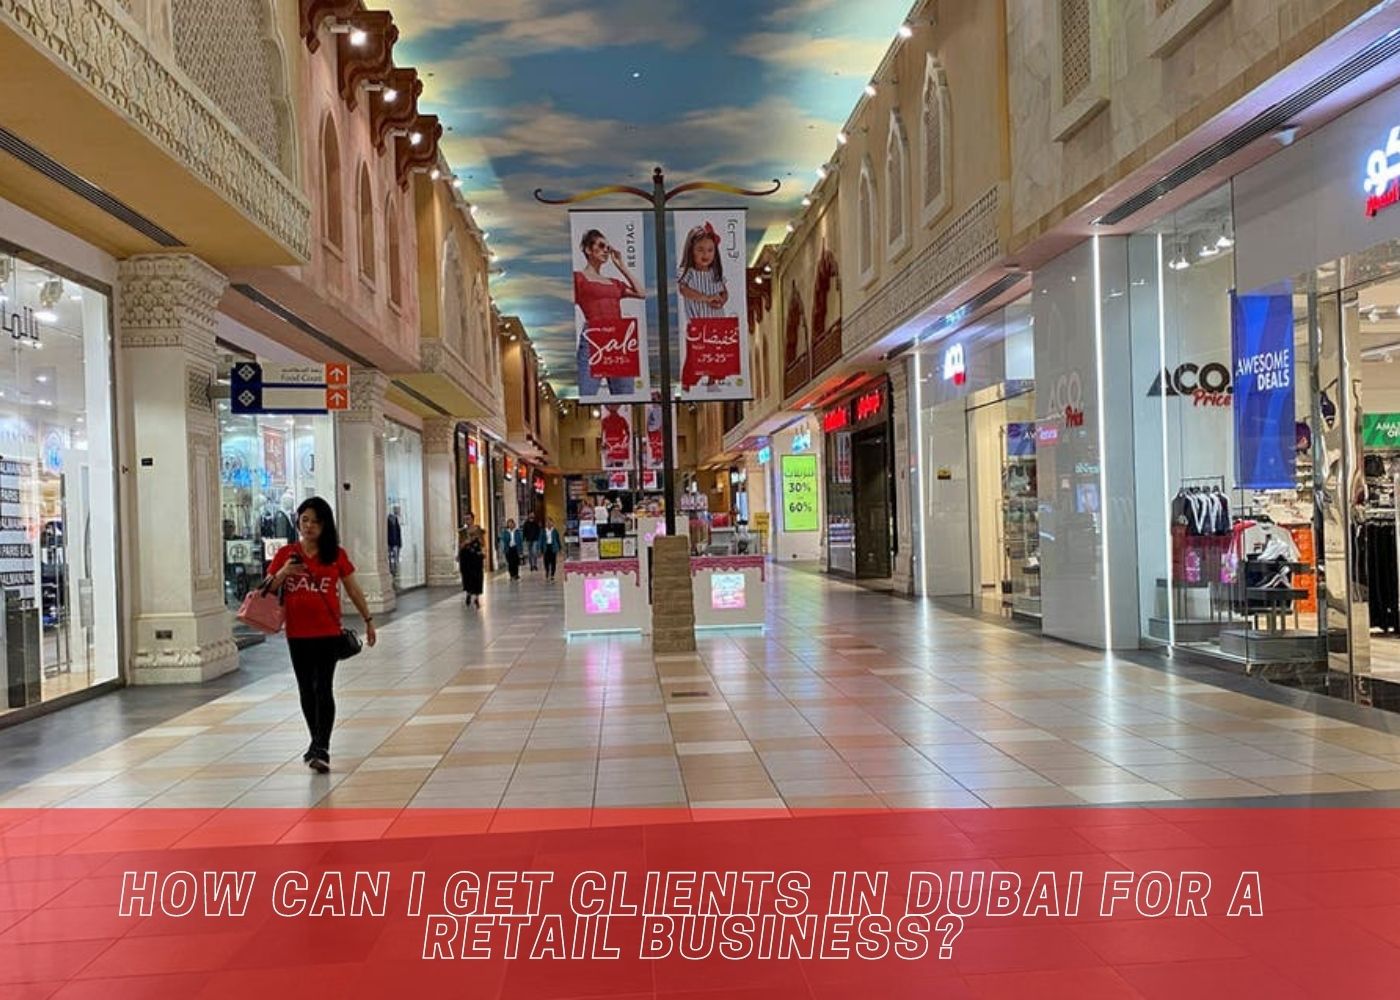 How can I get clients in Dubai for a retail business? 